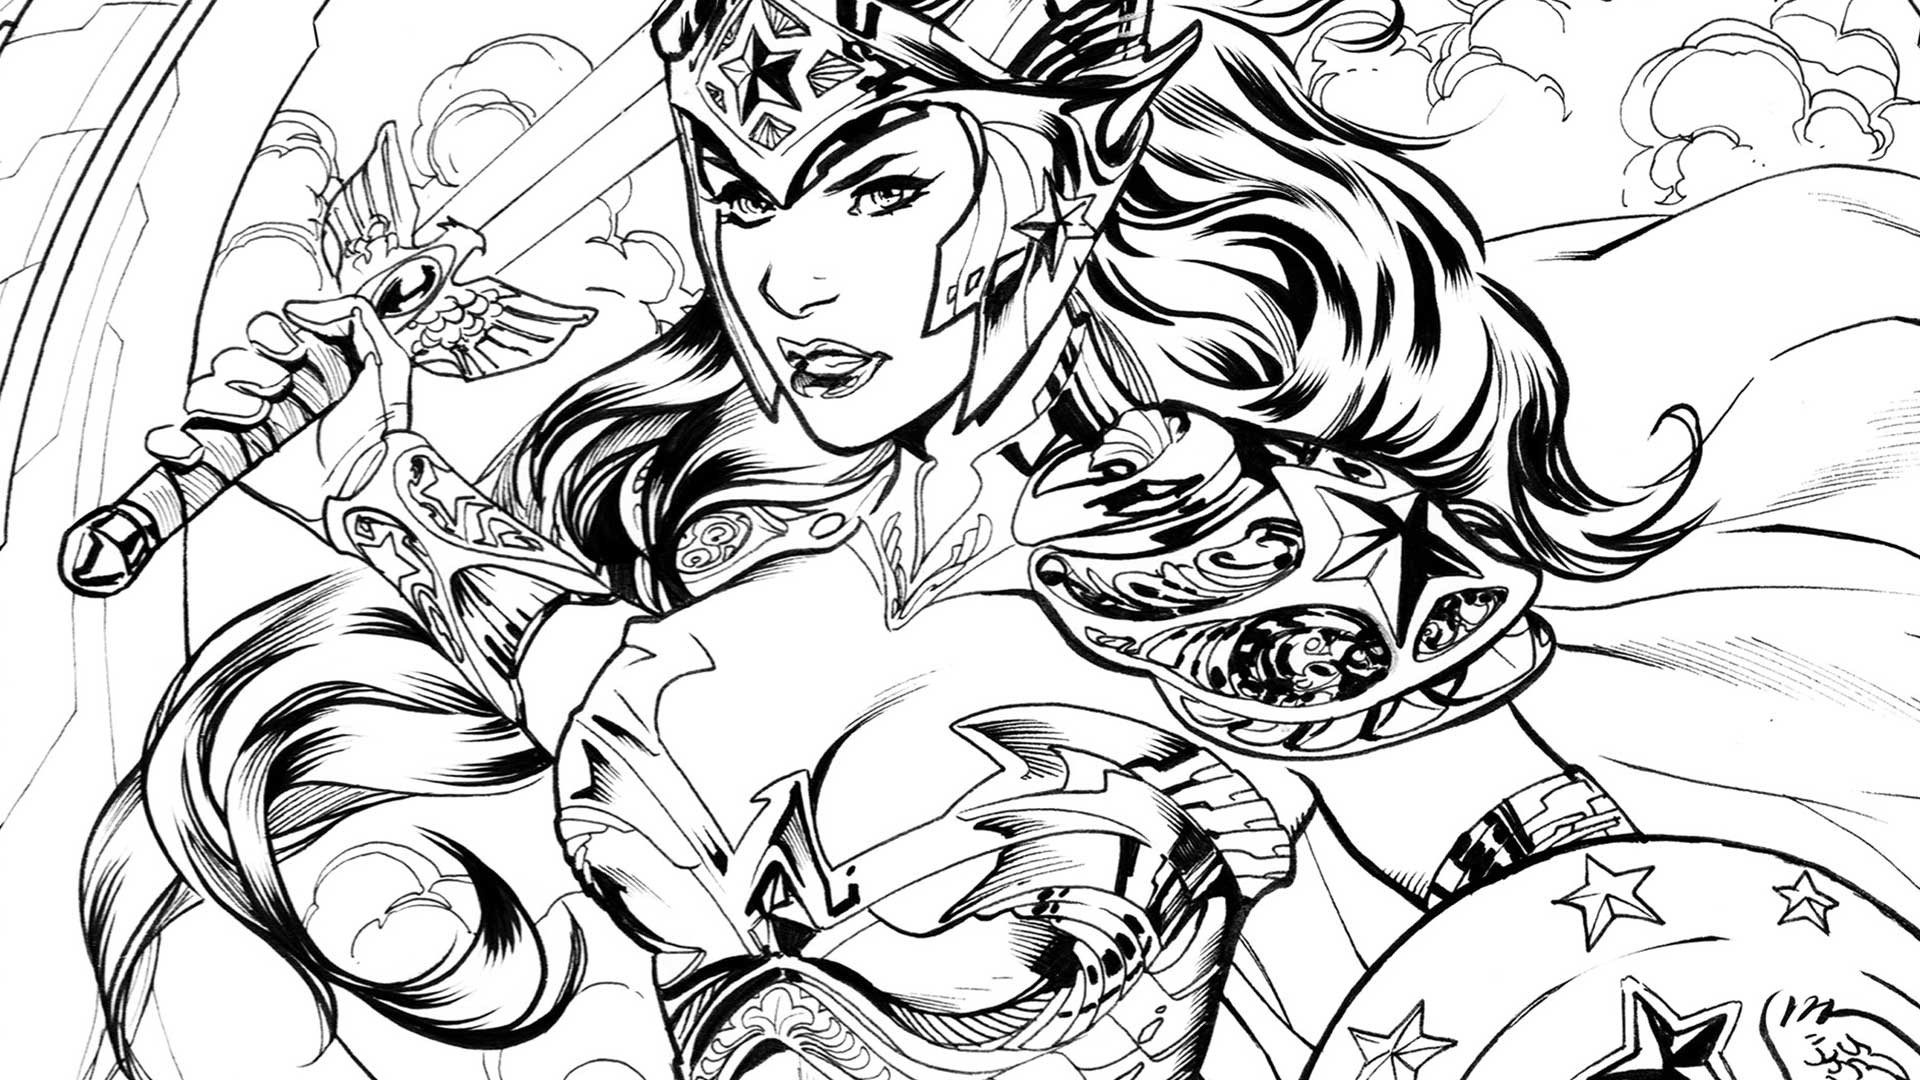 Wonder Woman Coloring Pages For Kids at GetDrawings.com ...